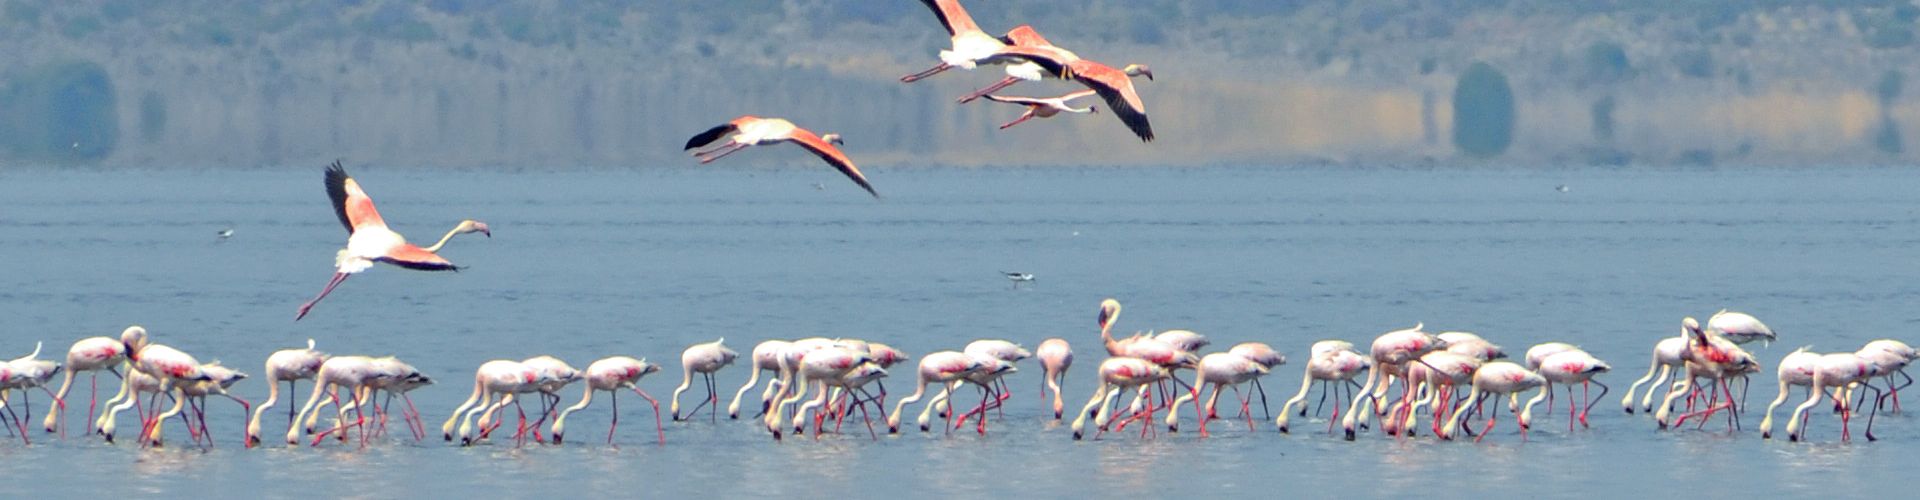 Lake Natron is the most important breeding habitat for lesser flamingos in the world